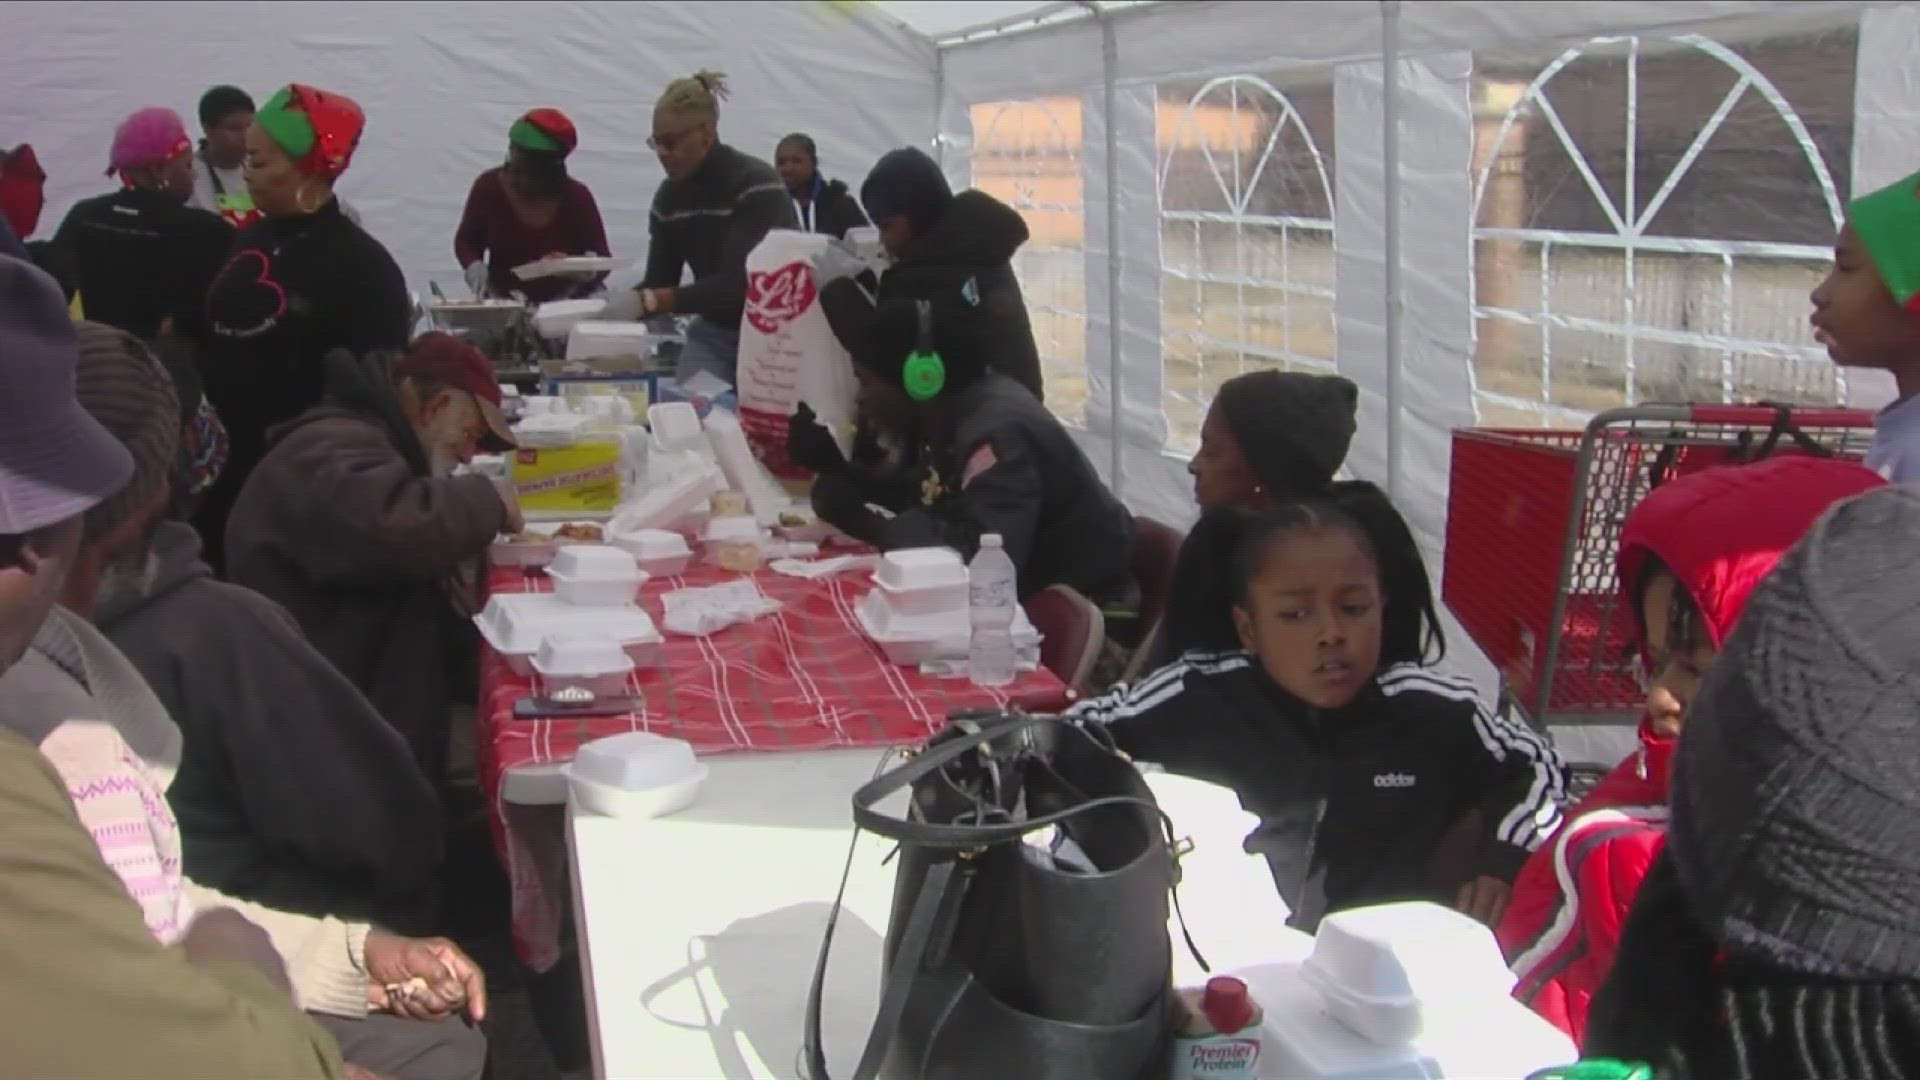 From North to South Memphis, downtown, and all over the area, communities gathered to make sure anyone who wanted it had a feast for the holiday.